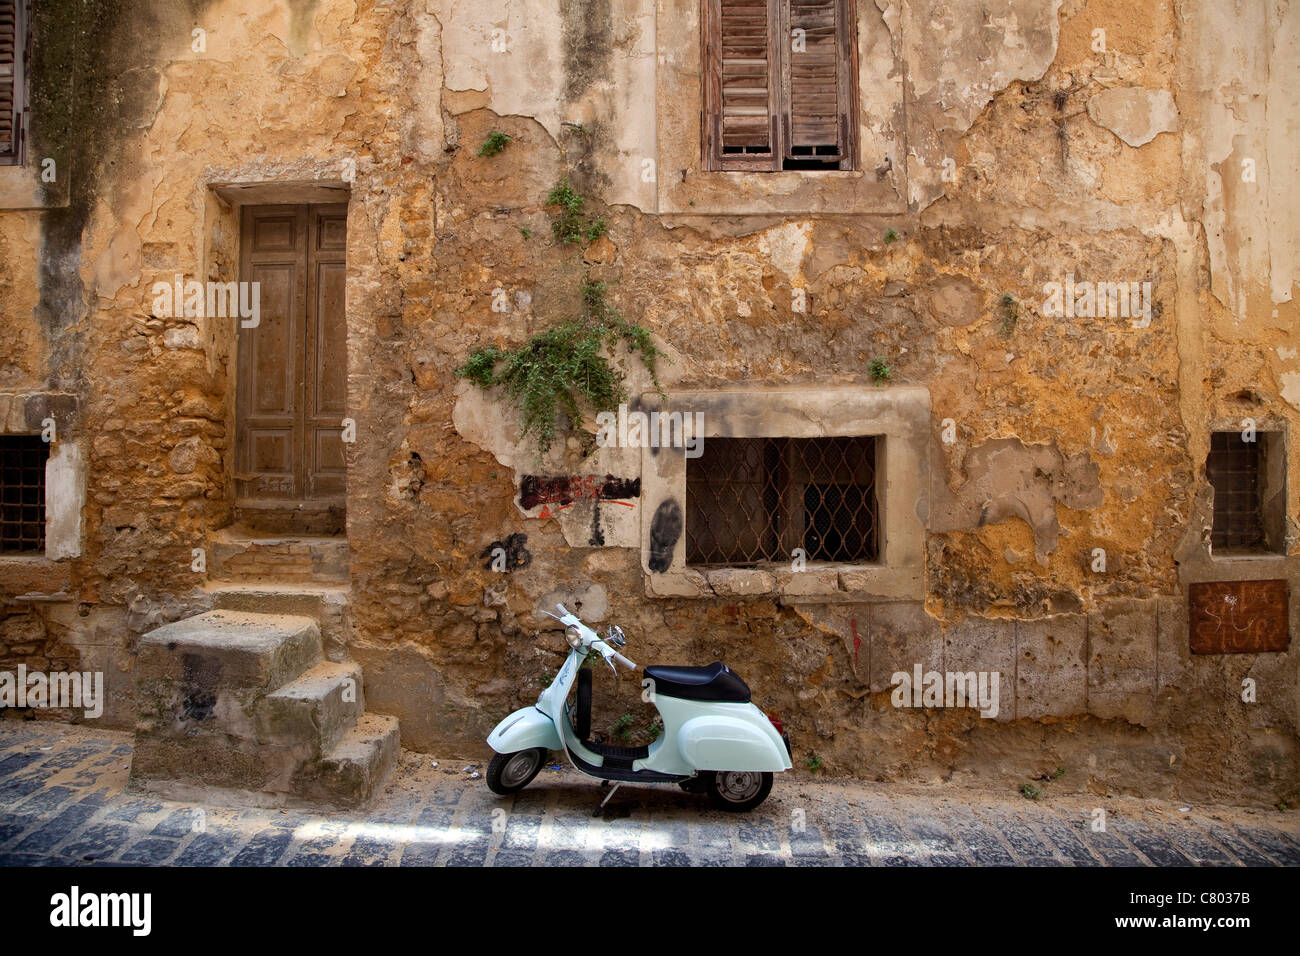 Old Vespa 50 scooter parked on the street in Caltagirone (Sicily, Italy). Vintage Piaggio moped motorcycle near old building wall in Sicilia, Italia Stock Photo